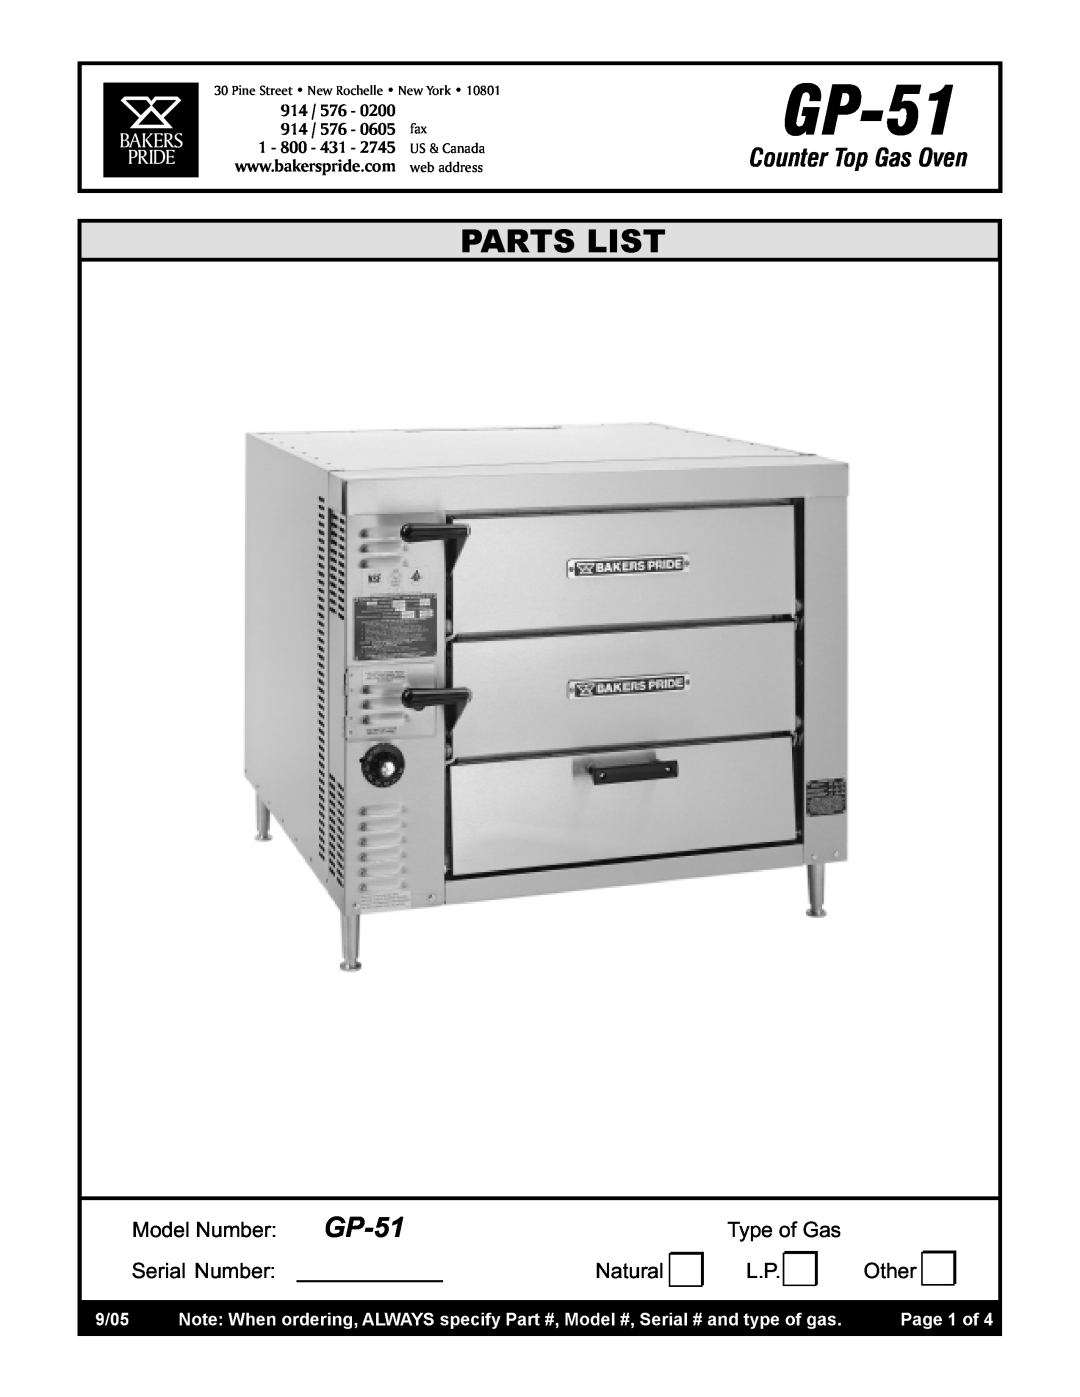 Bakers Pride Oven GP-51 manual Counter Top Gas Oven, Model Number, Type of Gas, Serial Number, Natural, Other, 0200, 0605 